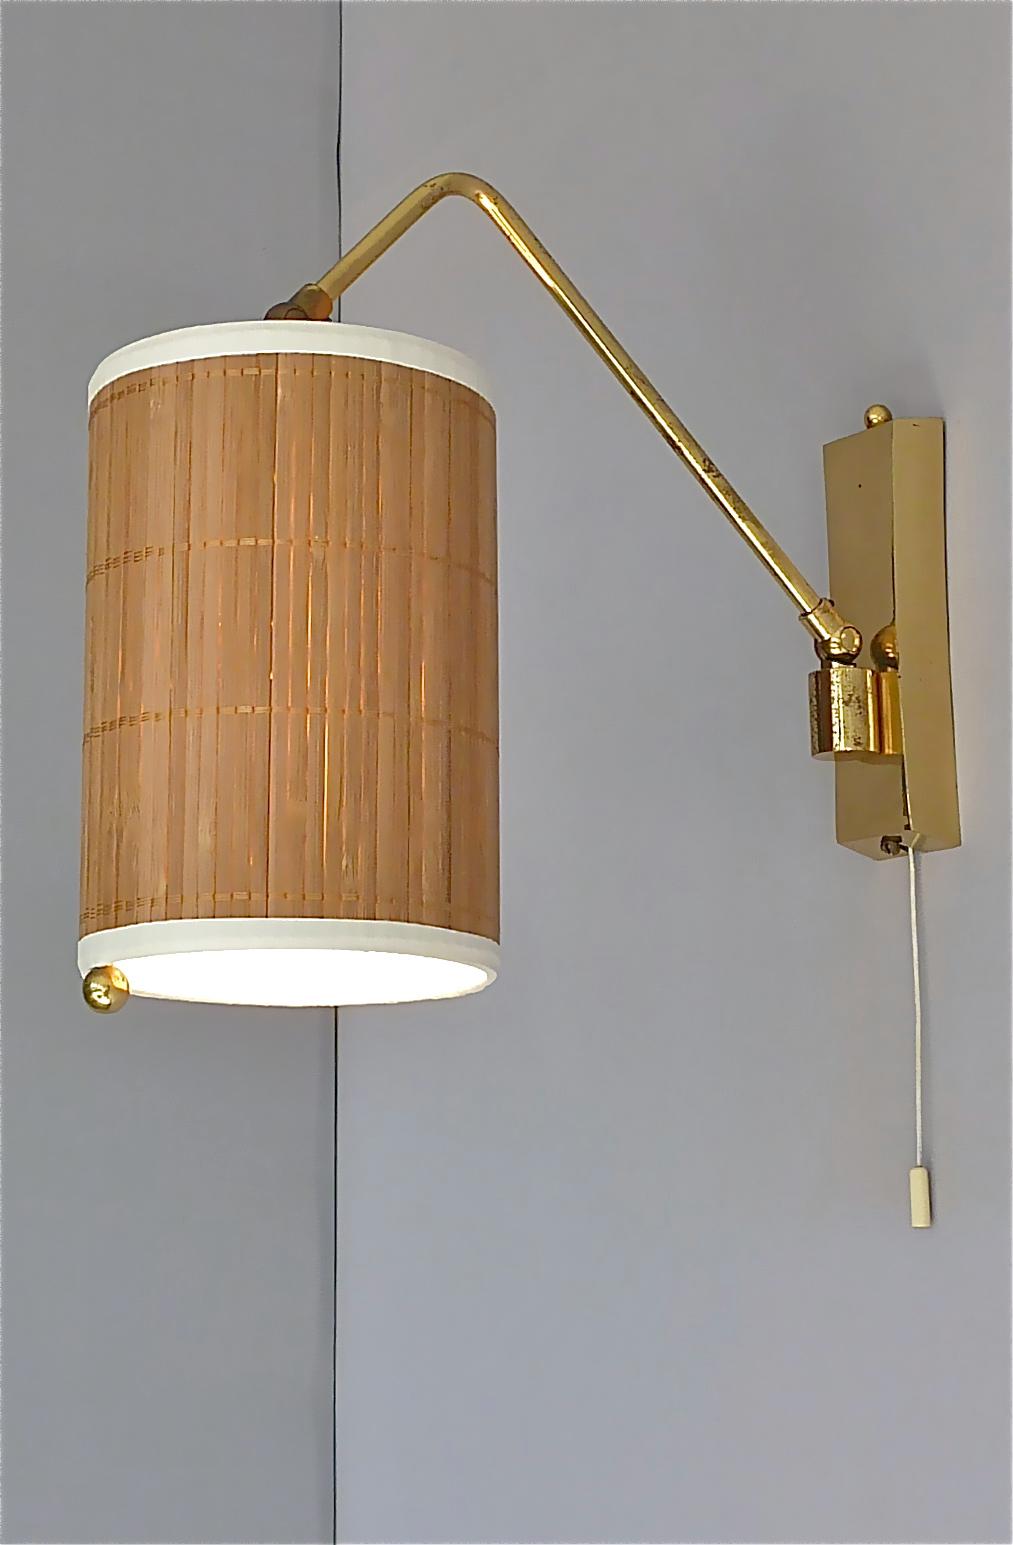 Wall Lamp Paavo Tynell Taito Oy Kalmar Style Brass Cane Wood Shade 1950s Sconce For Sale 6